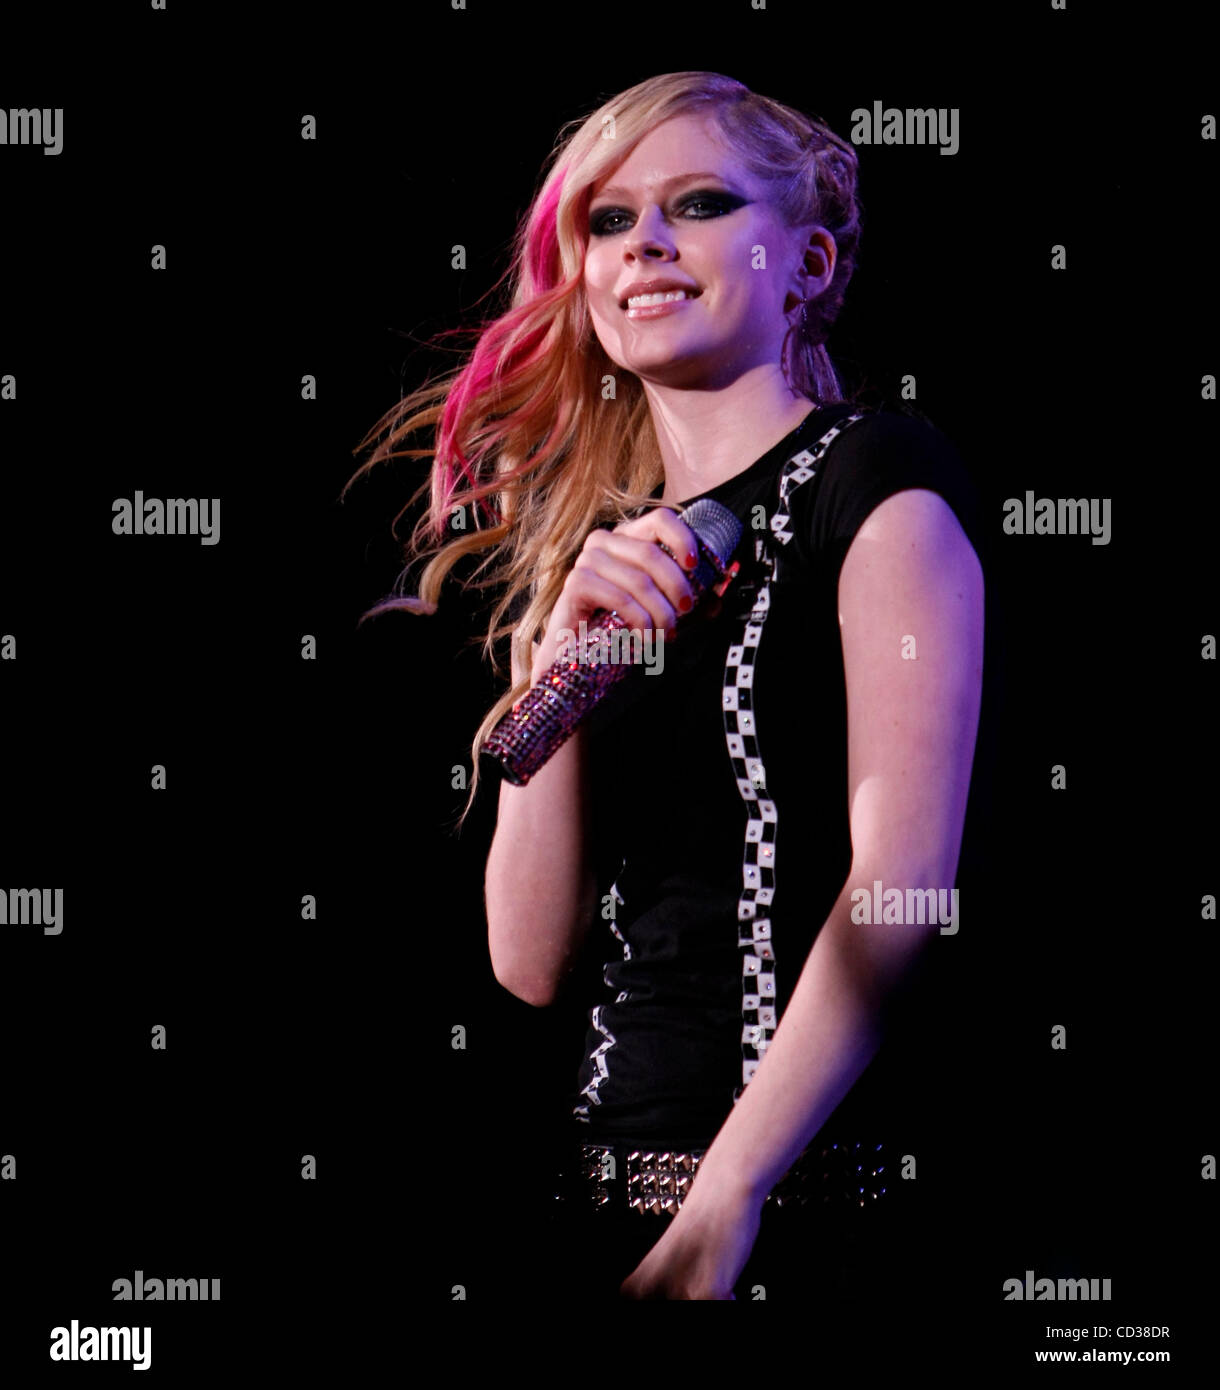 042008 acc avril  Photo by Lannis Waters/The Palm Beach Post  0051521A  [WITH STORY BY Leslie Streeter]--- WEST PALM BEACH ---    Avril Lavigne rocks out the Cruzan Amphitheatre Sunday night.  Lavigne's  third album 'Best Damn Thing', released in 2007,  topped the U.S. Album chart and reached platin Stock Photo